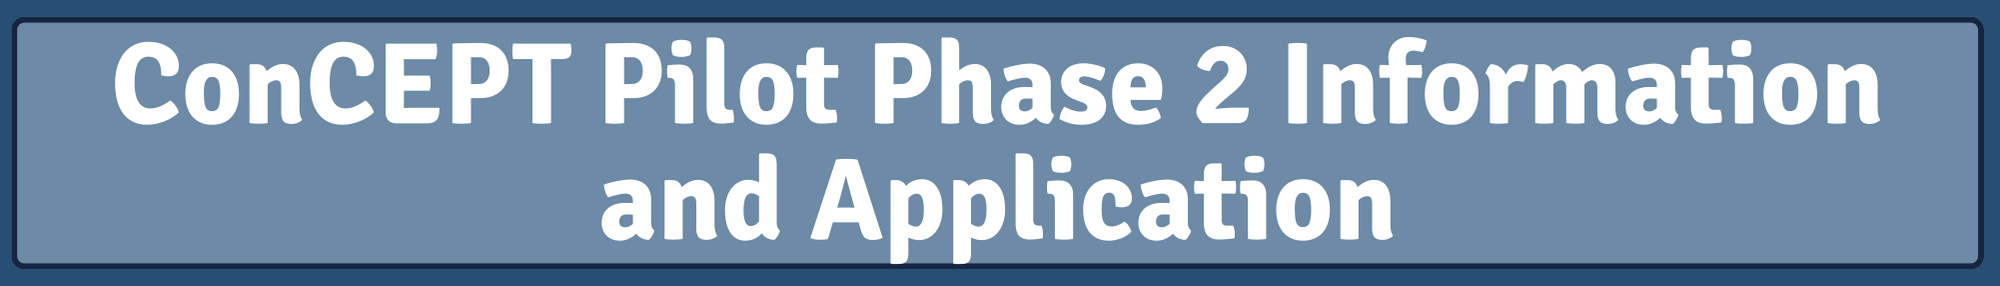 Button that will direct you to the Concept pilot phase 2 information and application page